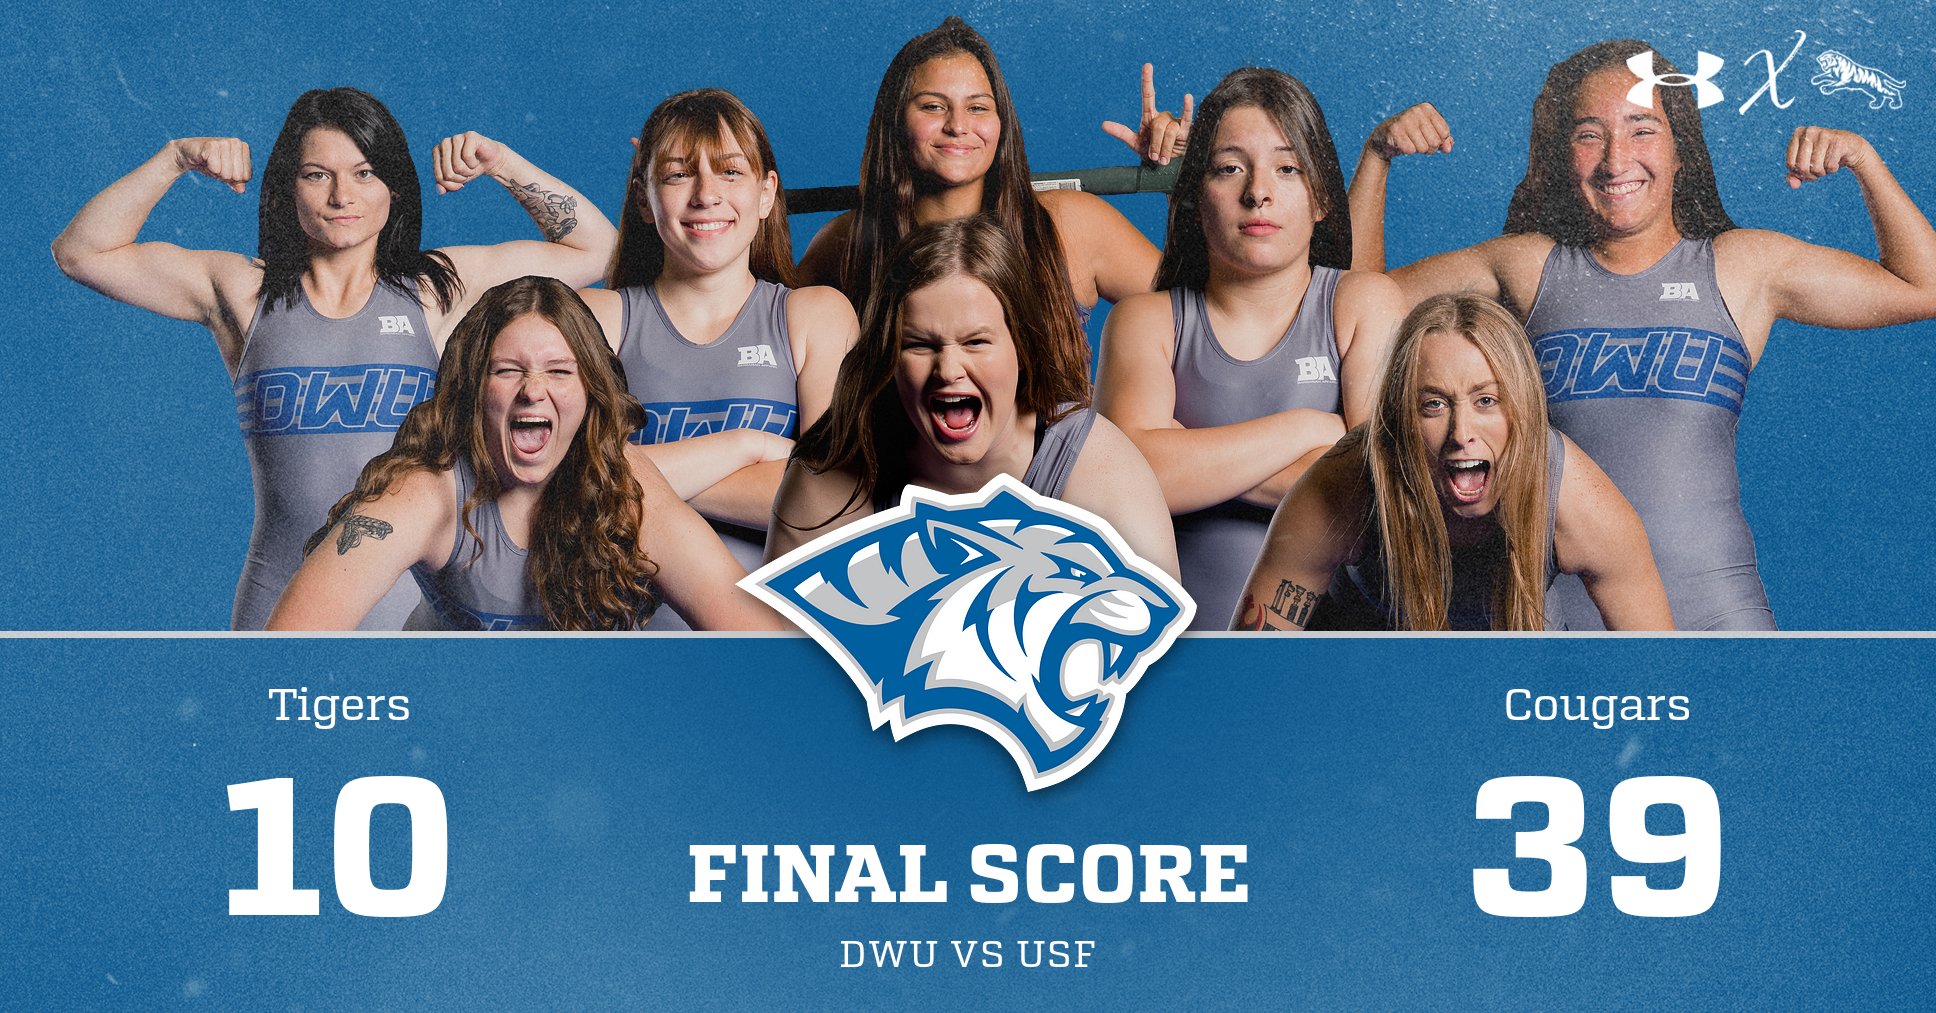 TIGERS FALL IN FIRST EVER COLLEGE WOMEN’S WRESTLING DUAL IN STATE OF SOUTH DAKOTA TO D2 COUGARS, 39-10